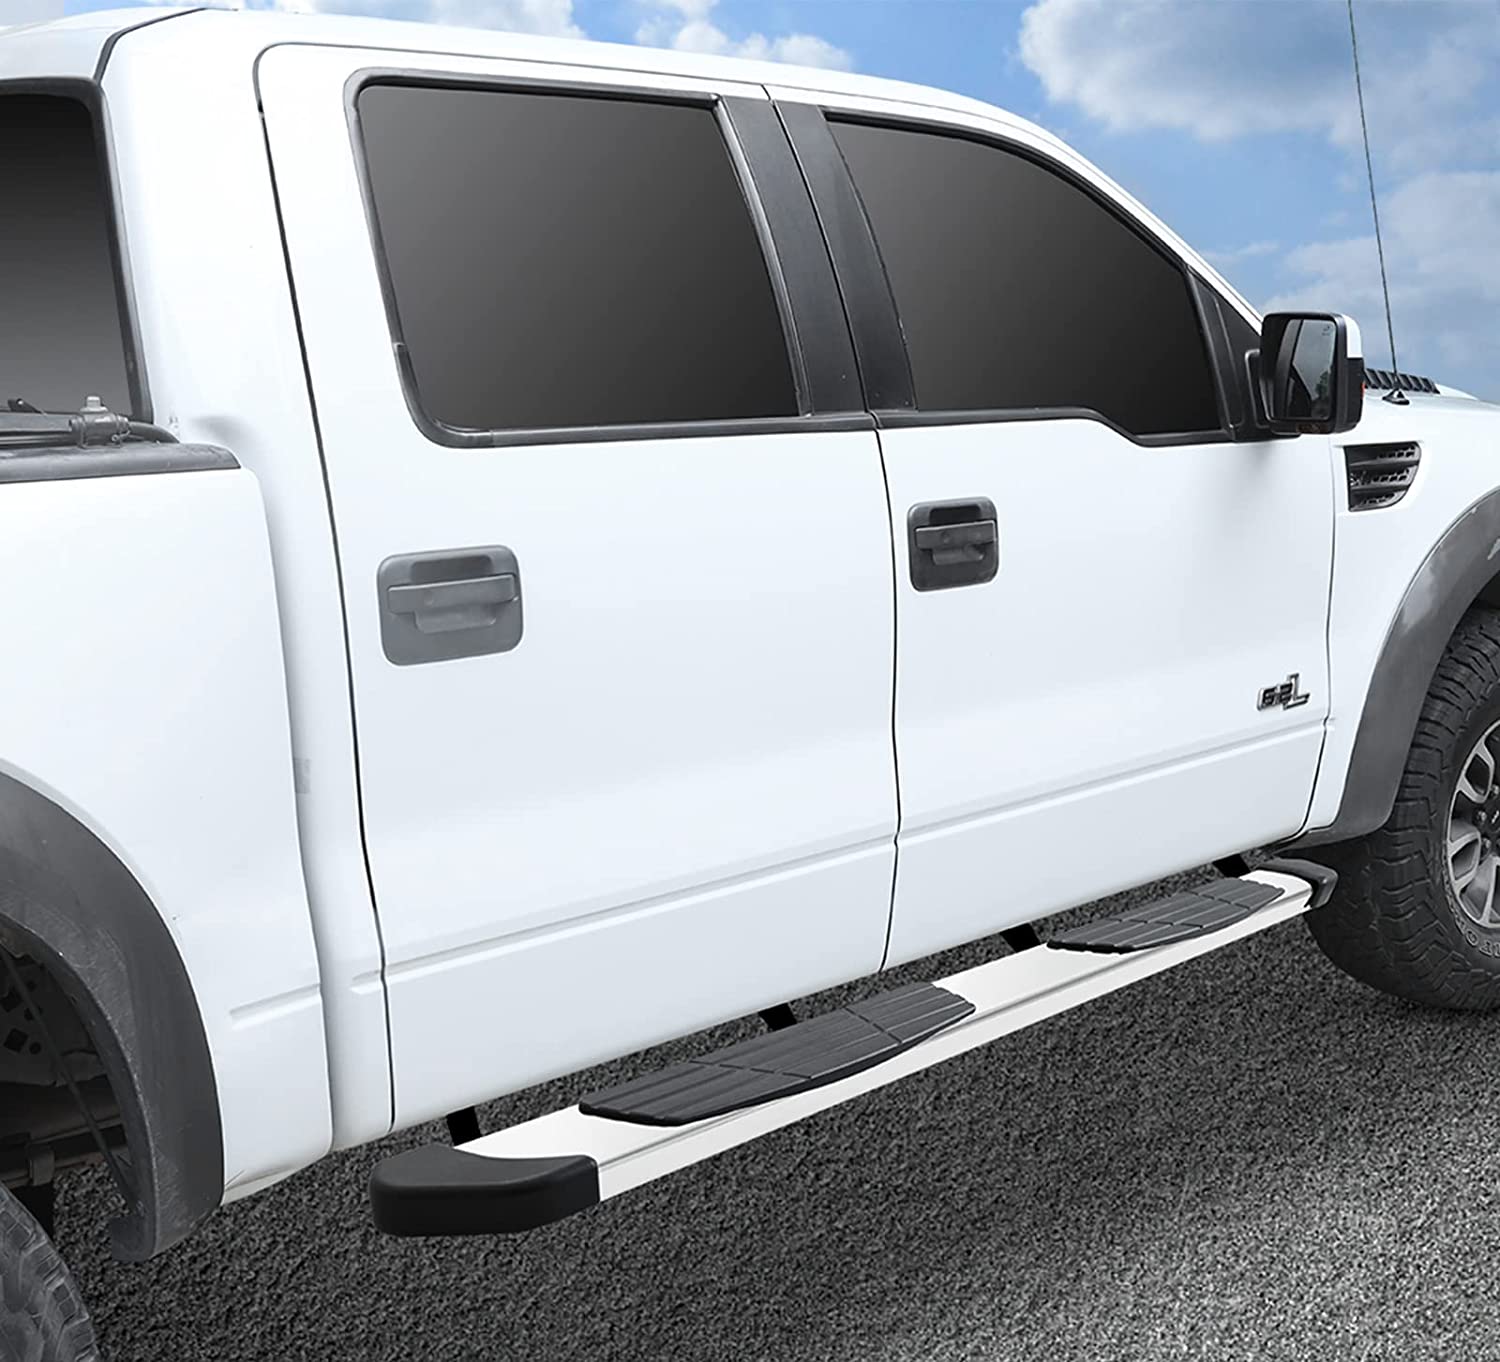 6.5” Running Boards Compatible with 2009-2018 Dodge Ram 1500 Quad Cab(Incl. 19-24 Ram 1500 Classic)& 2010-2024 Ram 2500 3500, Stainless Steel Side Steps T6 Style.- COMNOVA AUTOPART